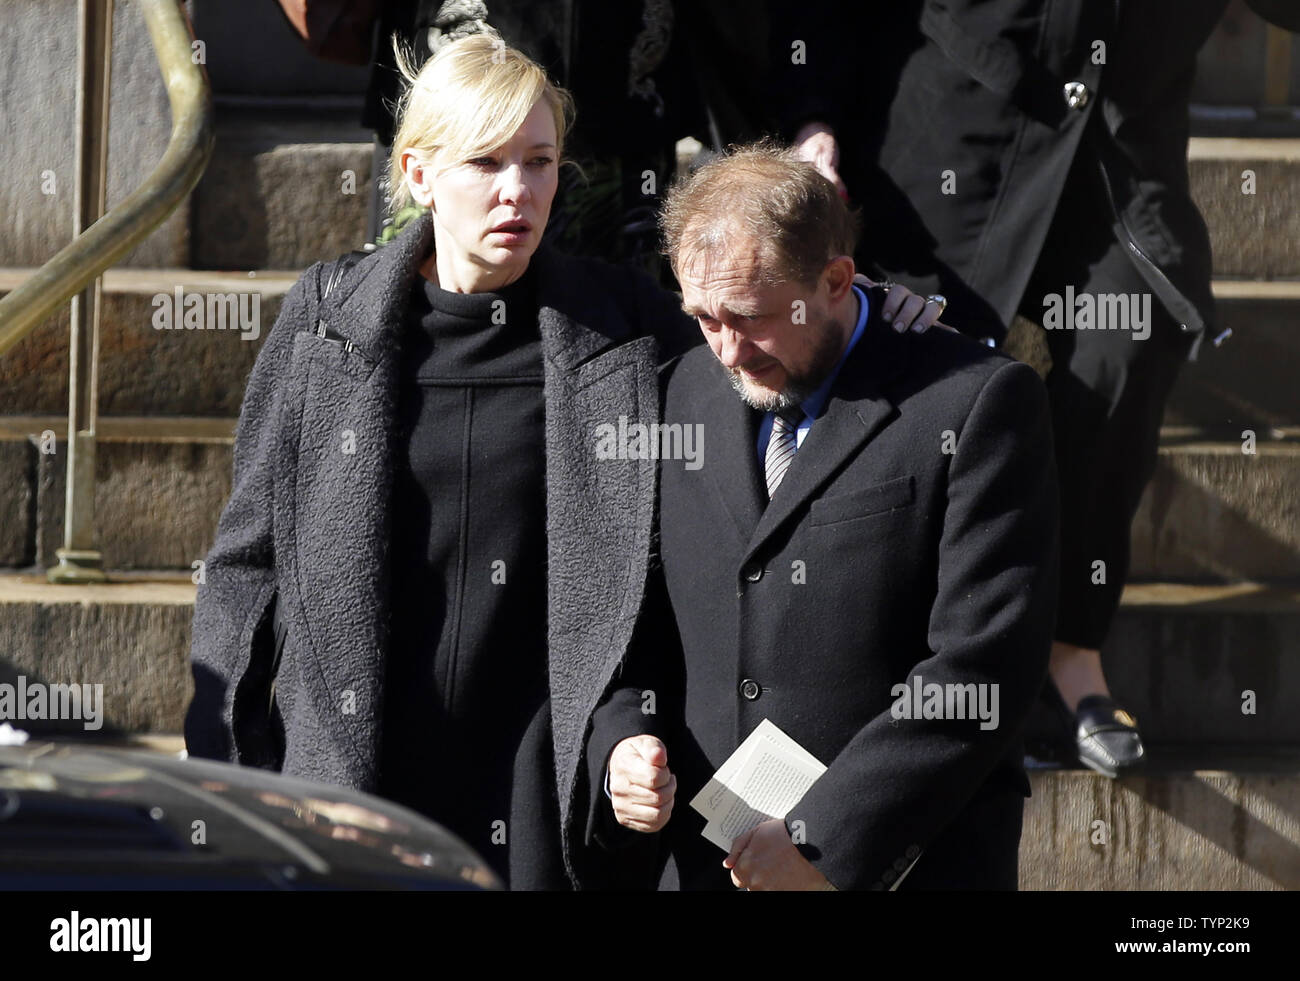 Cate Blanchett and Andrew Upton exit the funeral of Philip Seymour Hoffman at St. Ignatius Church on Manhattan's Upper East Side in New York City on February 7, 2014. Hoffman, 46, was found dead Sunday of an apparent heroin overdose in his apartment. He leaves behind his partner of 15 years, Mimi O'Donnell, and their three children.     UPI/John Angelillo Stock Photo